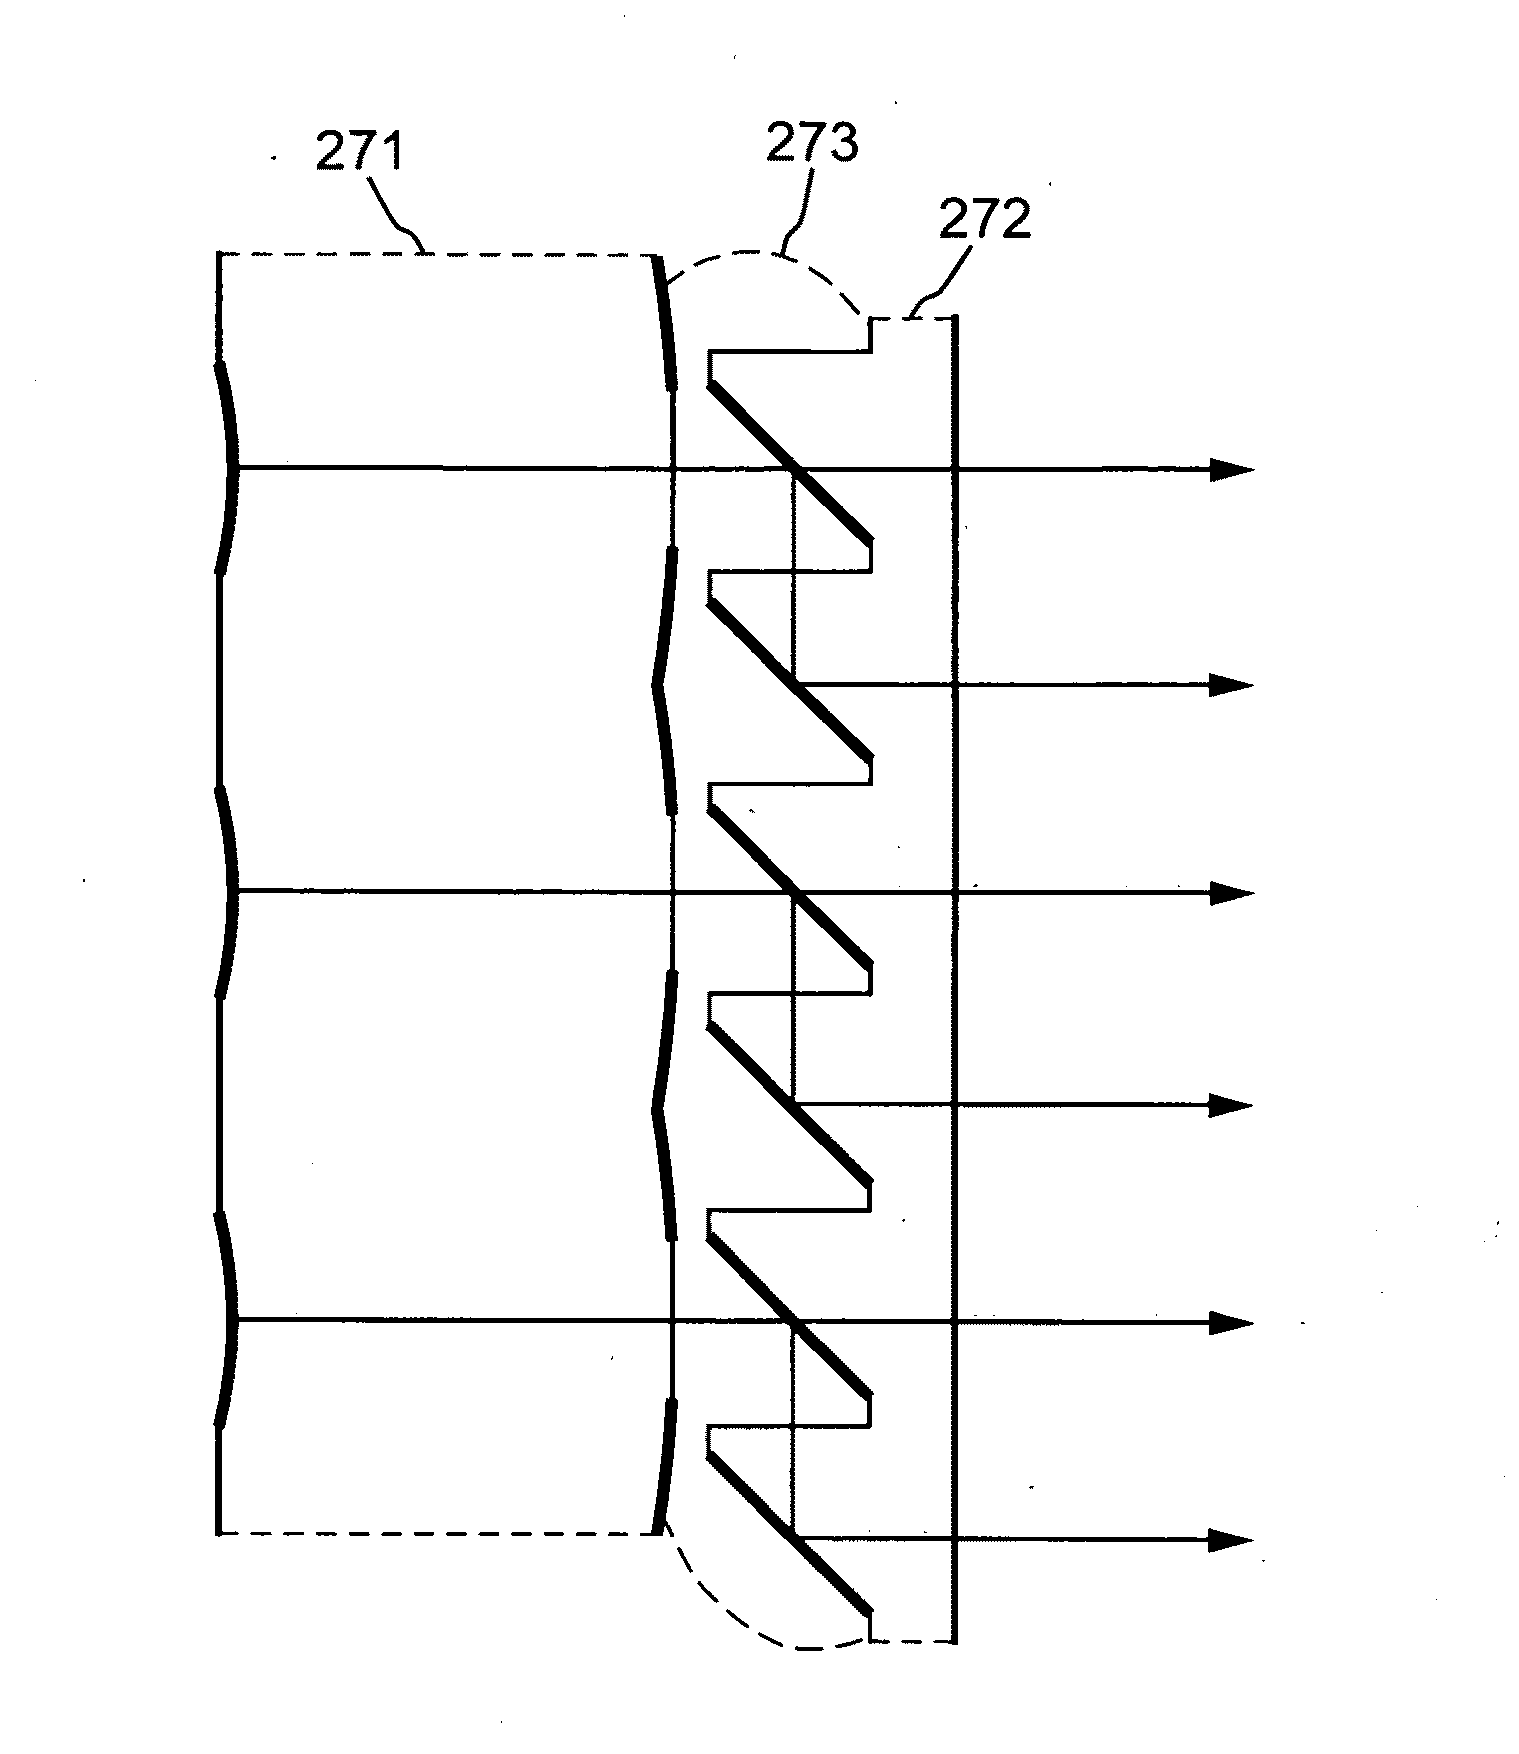 Optical apparatus for magnifying a view of an object at a distance